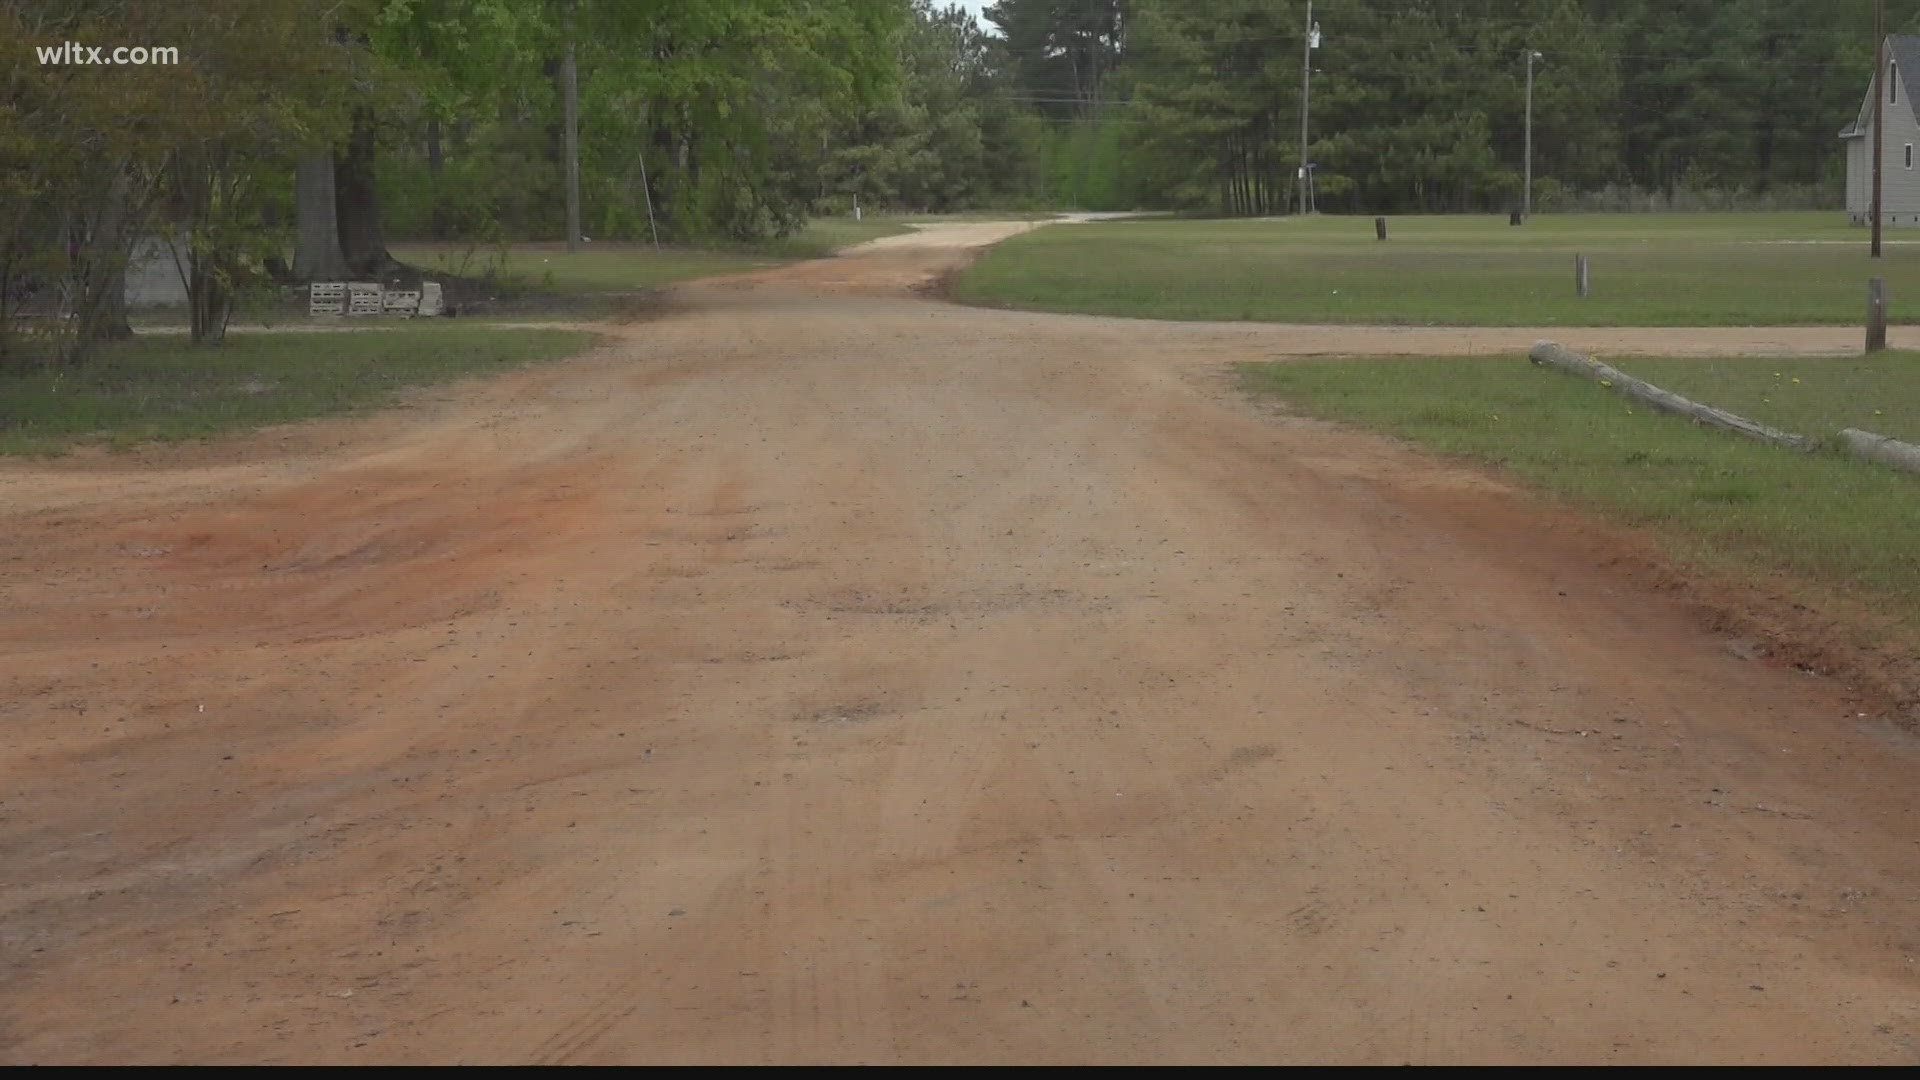 Residents are looking to see if the county can maintain these private roads in Sumter county.